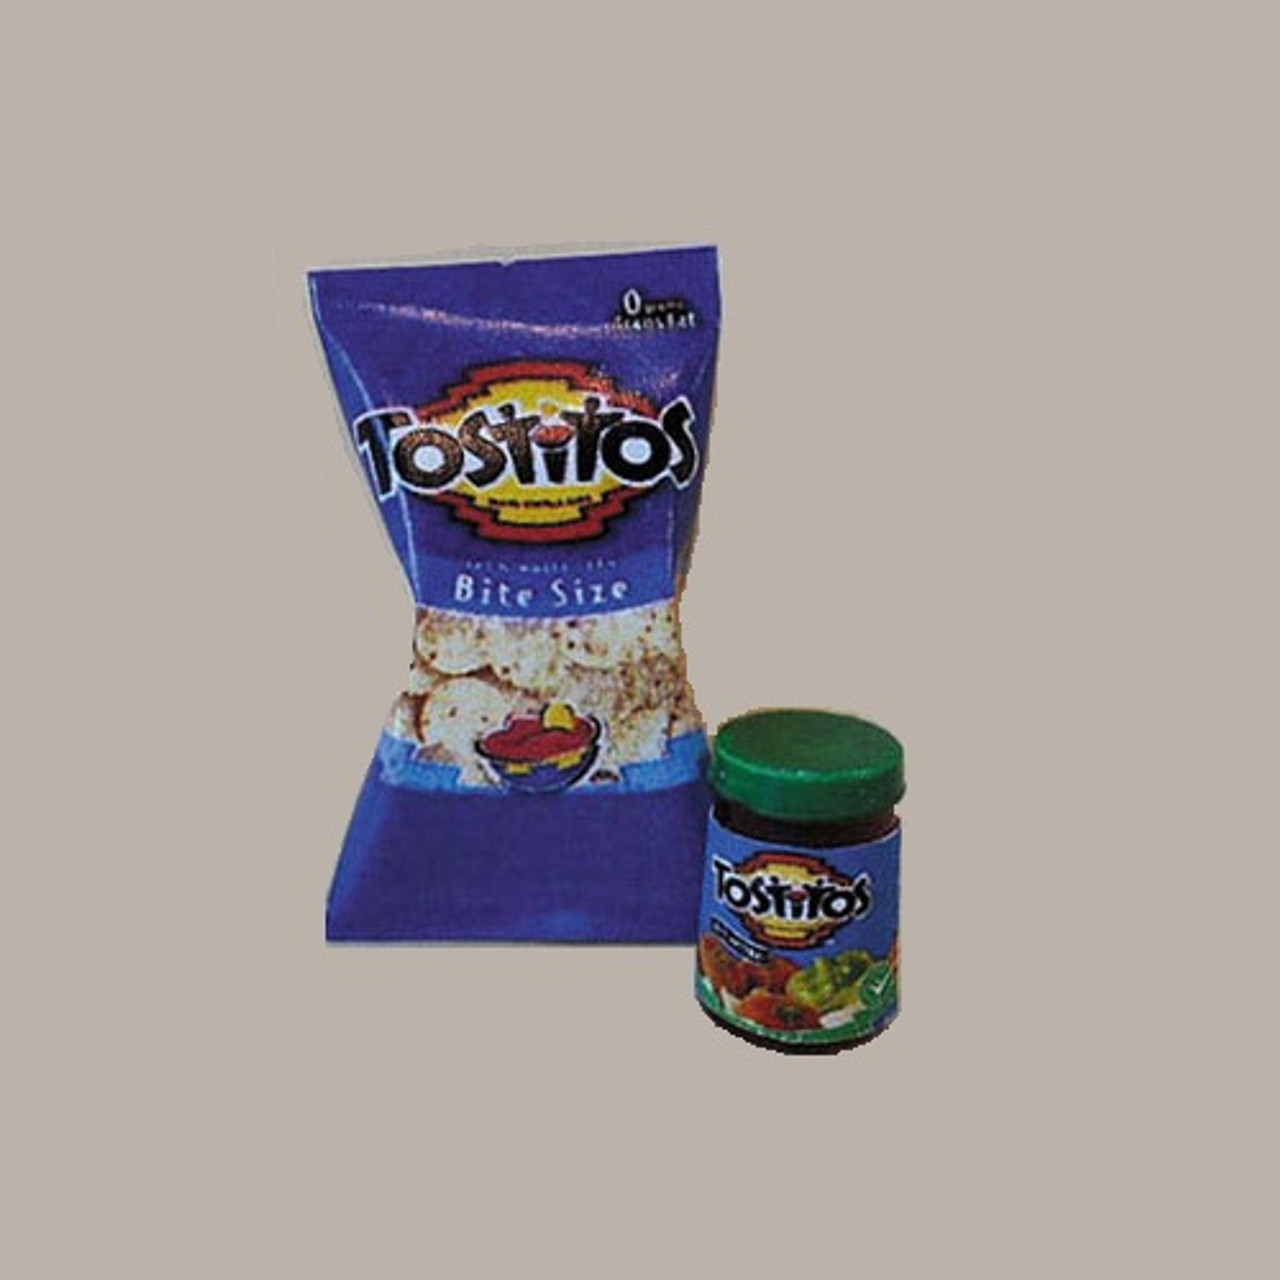 Dollhouse miniature Tostitos Chips Bag with Jar Of Salsa